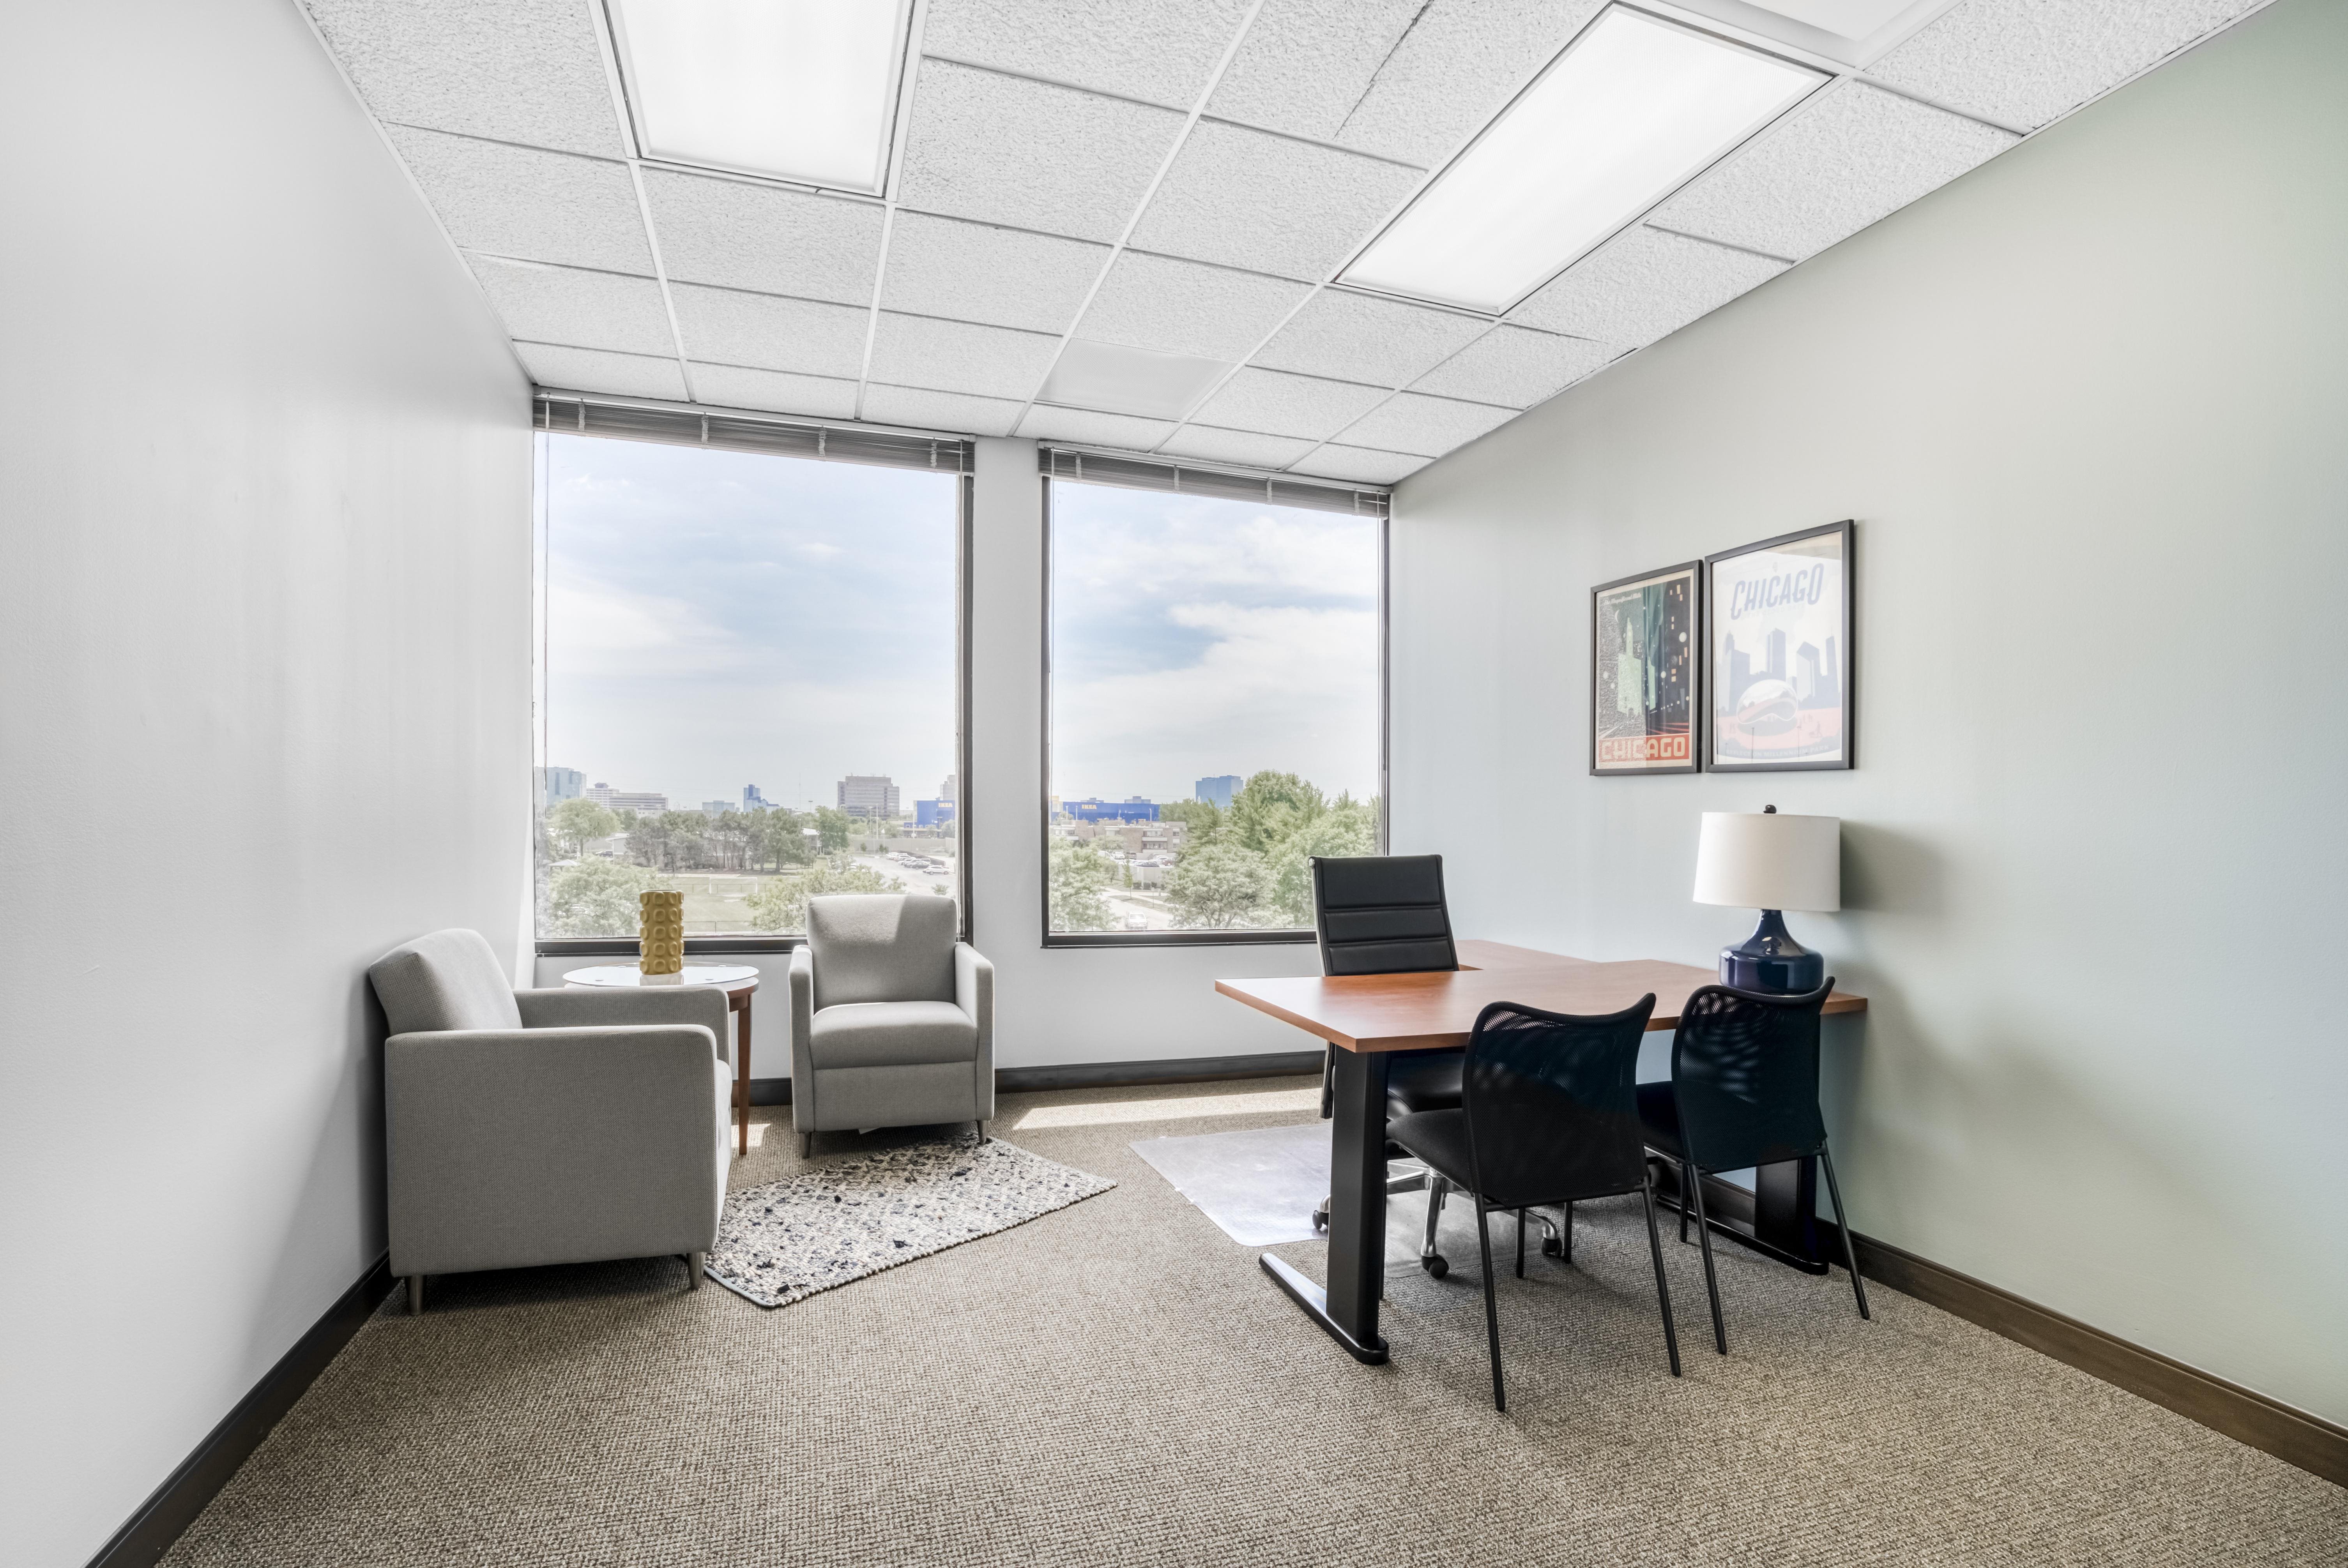 Virtual Office Space in Palatine |Rent a Virtual Office Address in Palatine